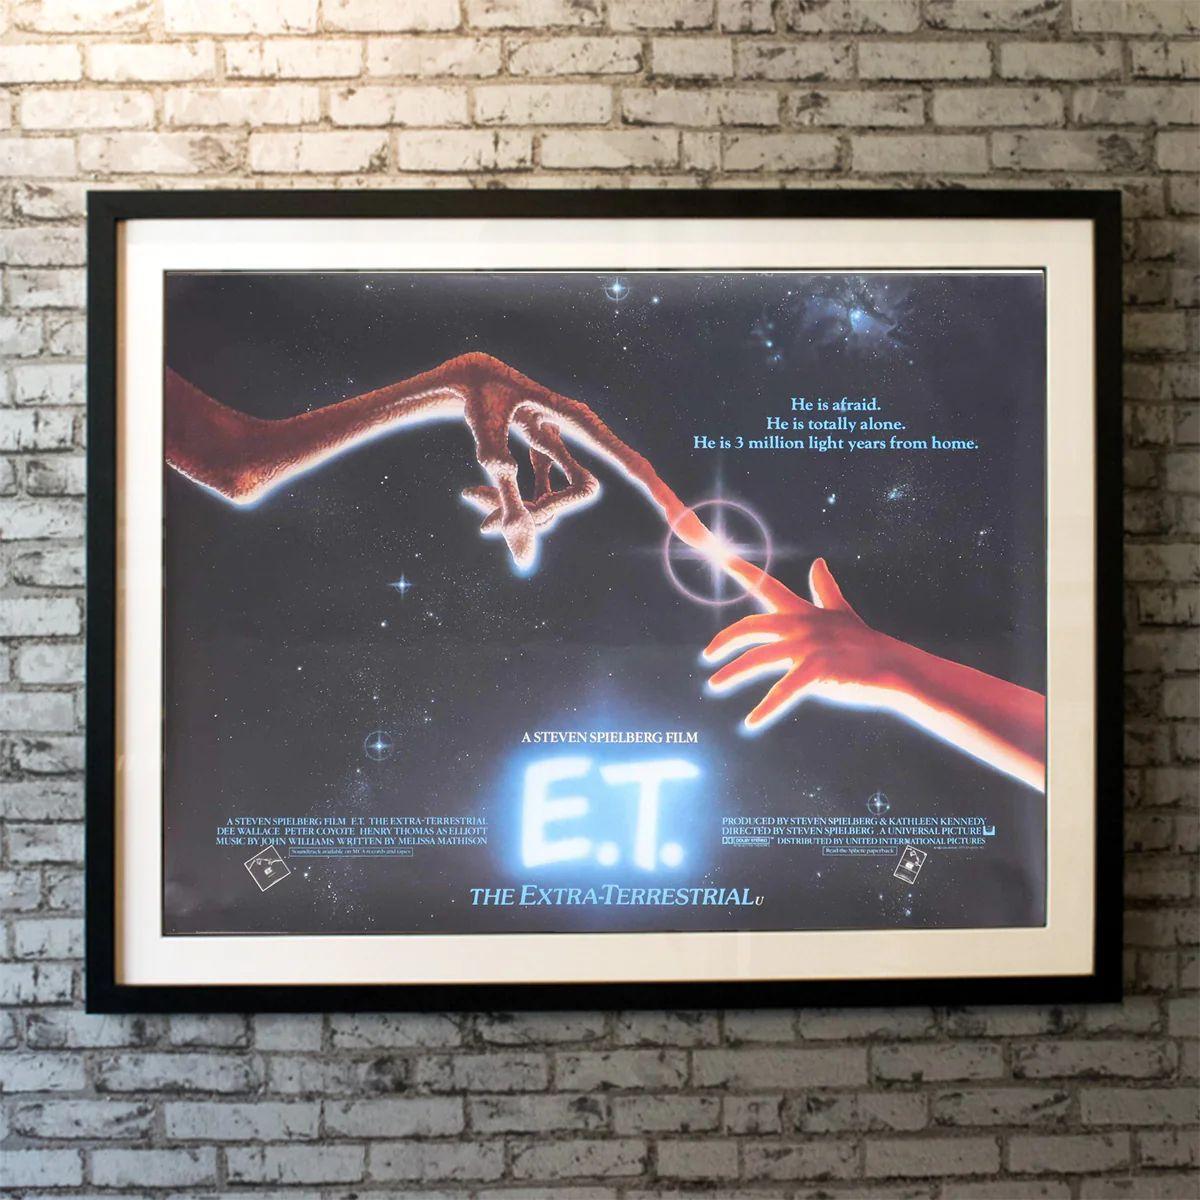 E.T. The Extra-Terrestrial, Unframed Poster, 1982

Original British Quad (30 X 40 Inches). A troubled child summons the courage to help a friendly alien escape from Earth and return to his home planet.

Additional Information:
Year: